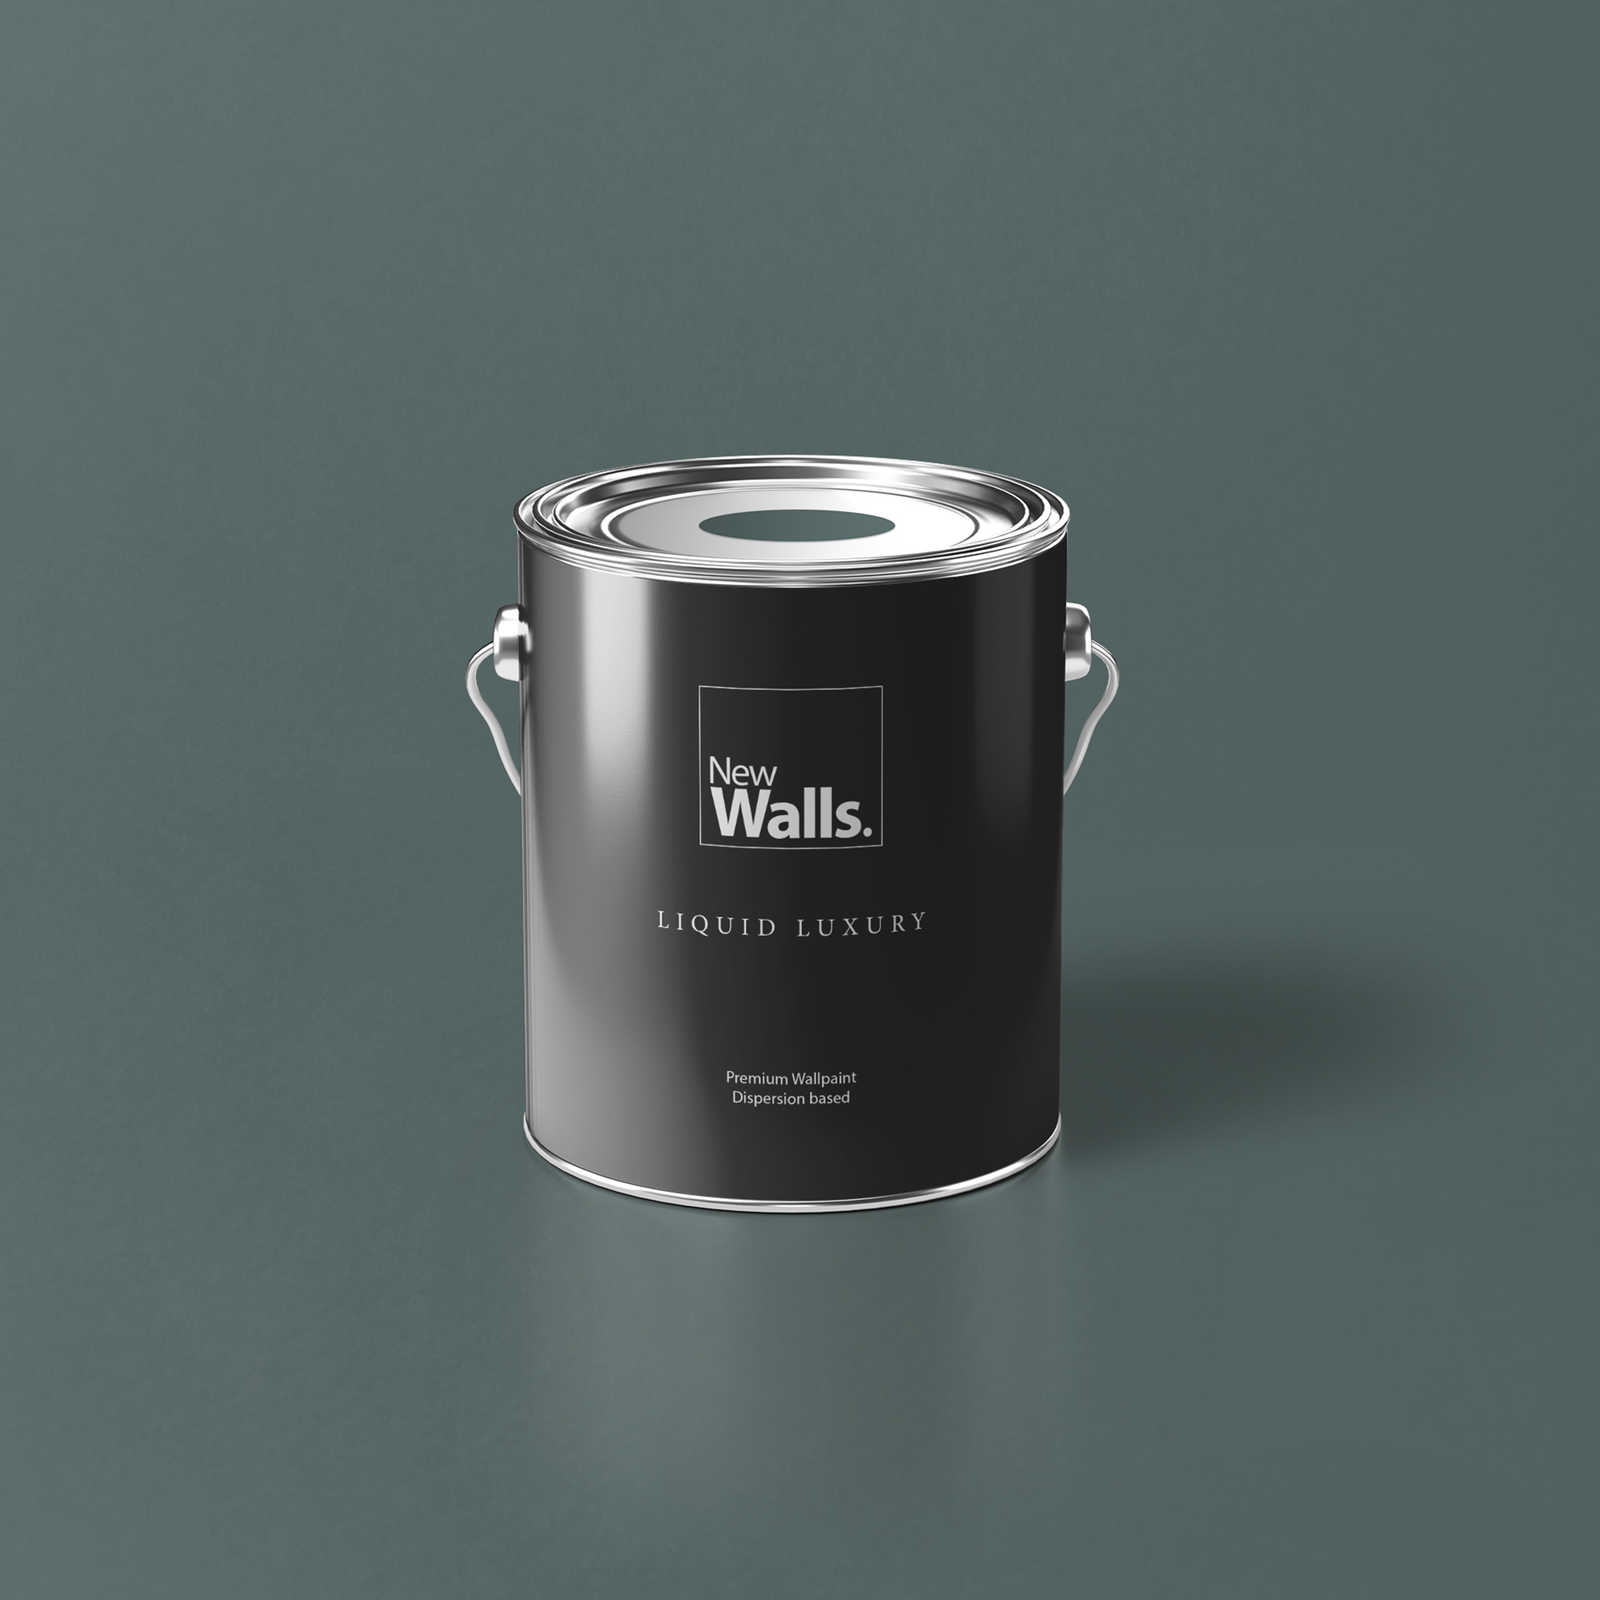 Premium Wall Paint Relaxing Grey Green »Sweet Sage« NW405 – 2.5 litre
